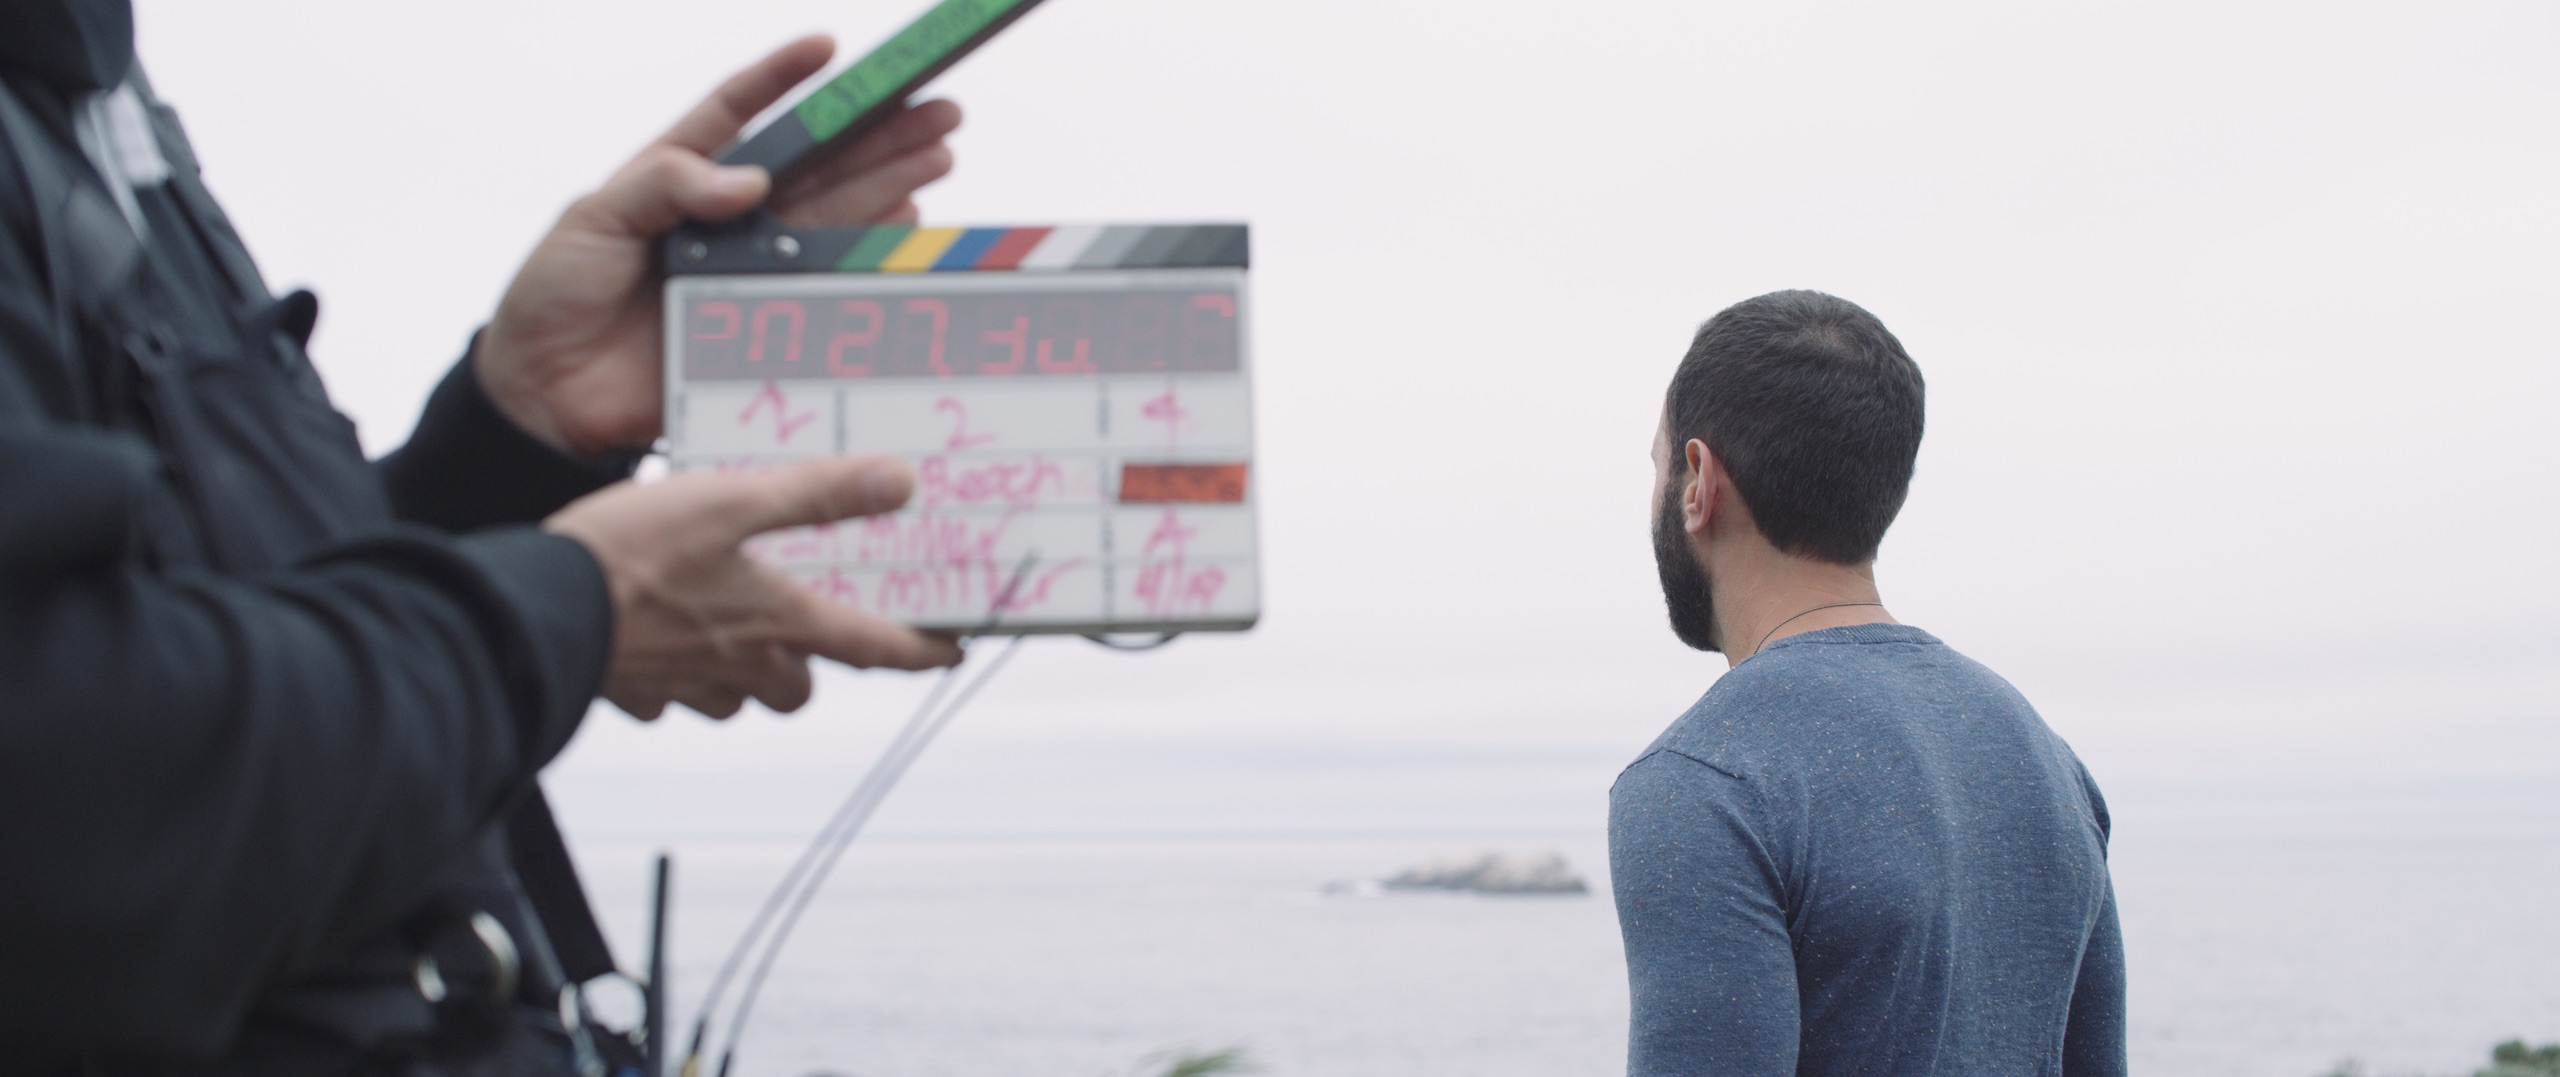 The Dailies Episode 3 BTS Footage for Komuso with view from behind of man wearing a blue shirt looking out over the water with a crew member holding a clapboard behind him